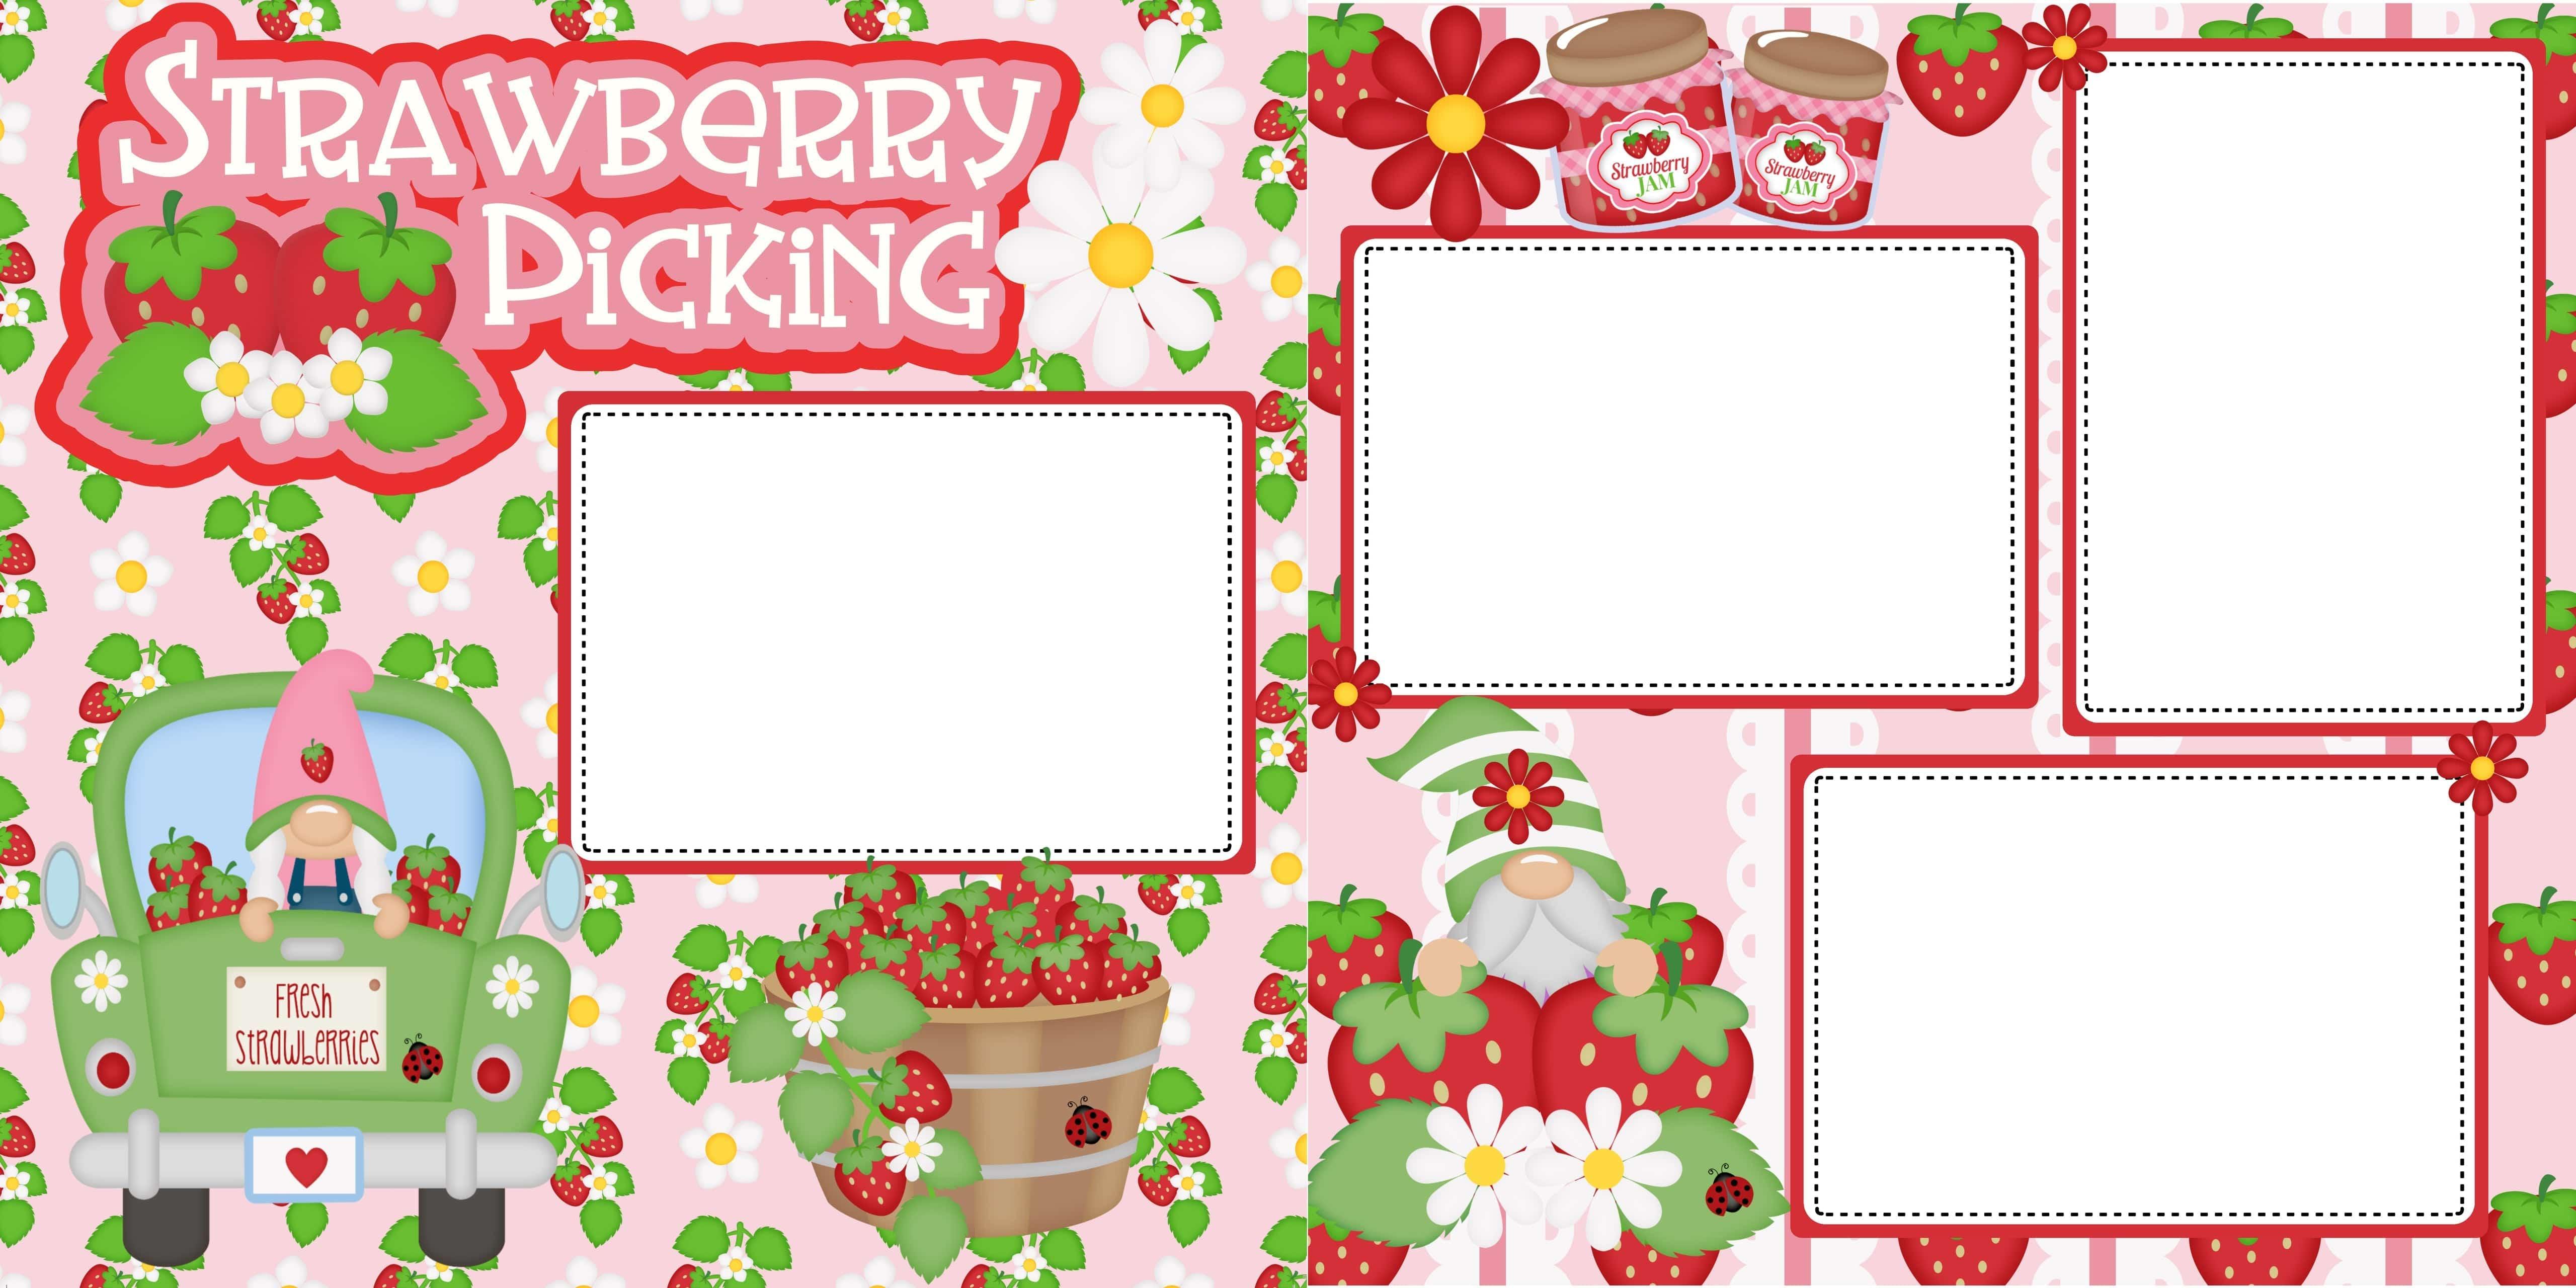 Gnomes Picking Strawberries (2) - 12 x 12 Premade, Printed Scrapbook Pages by SSC Designs - Scrapbook Supply Companies